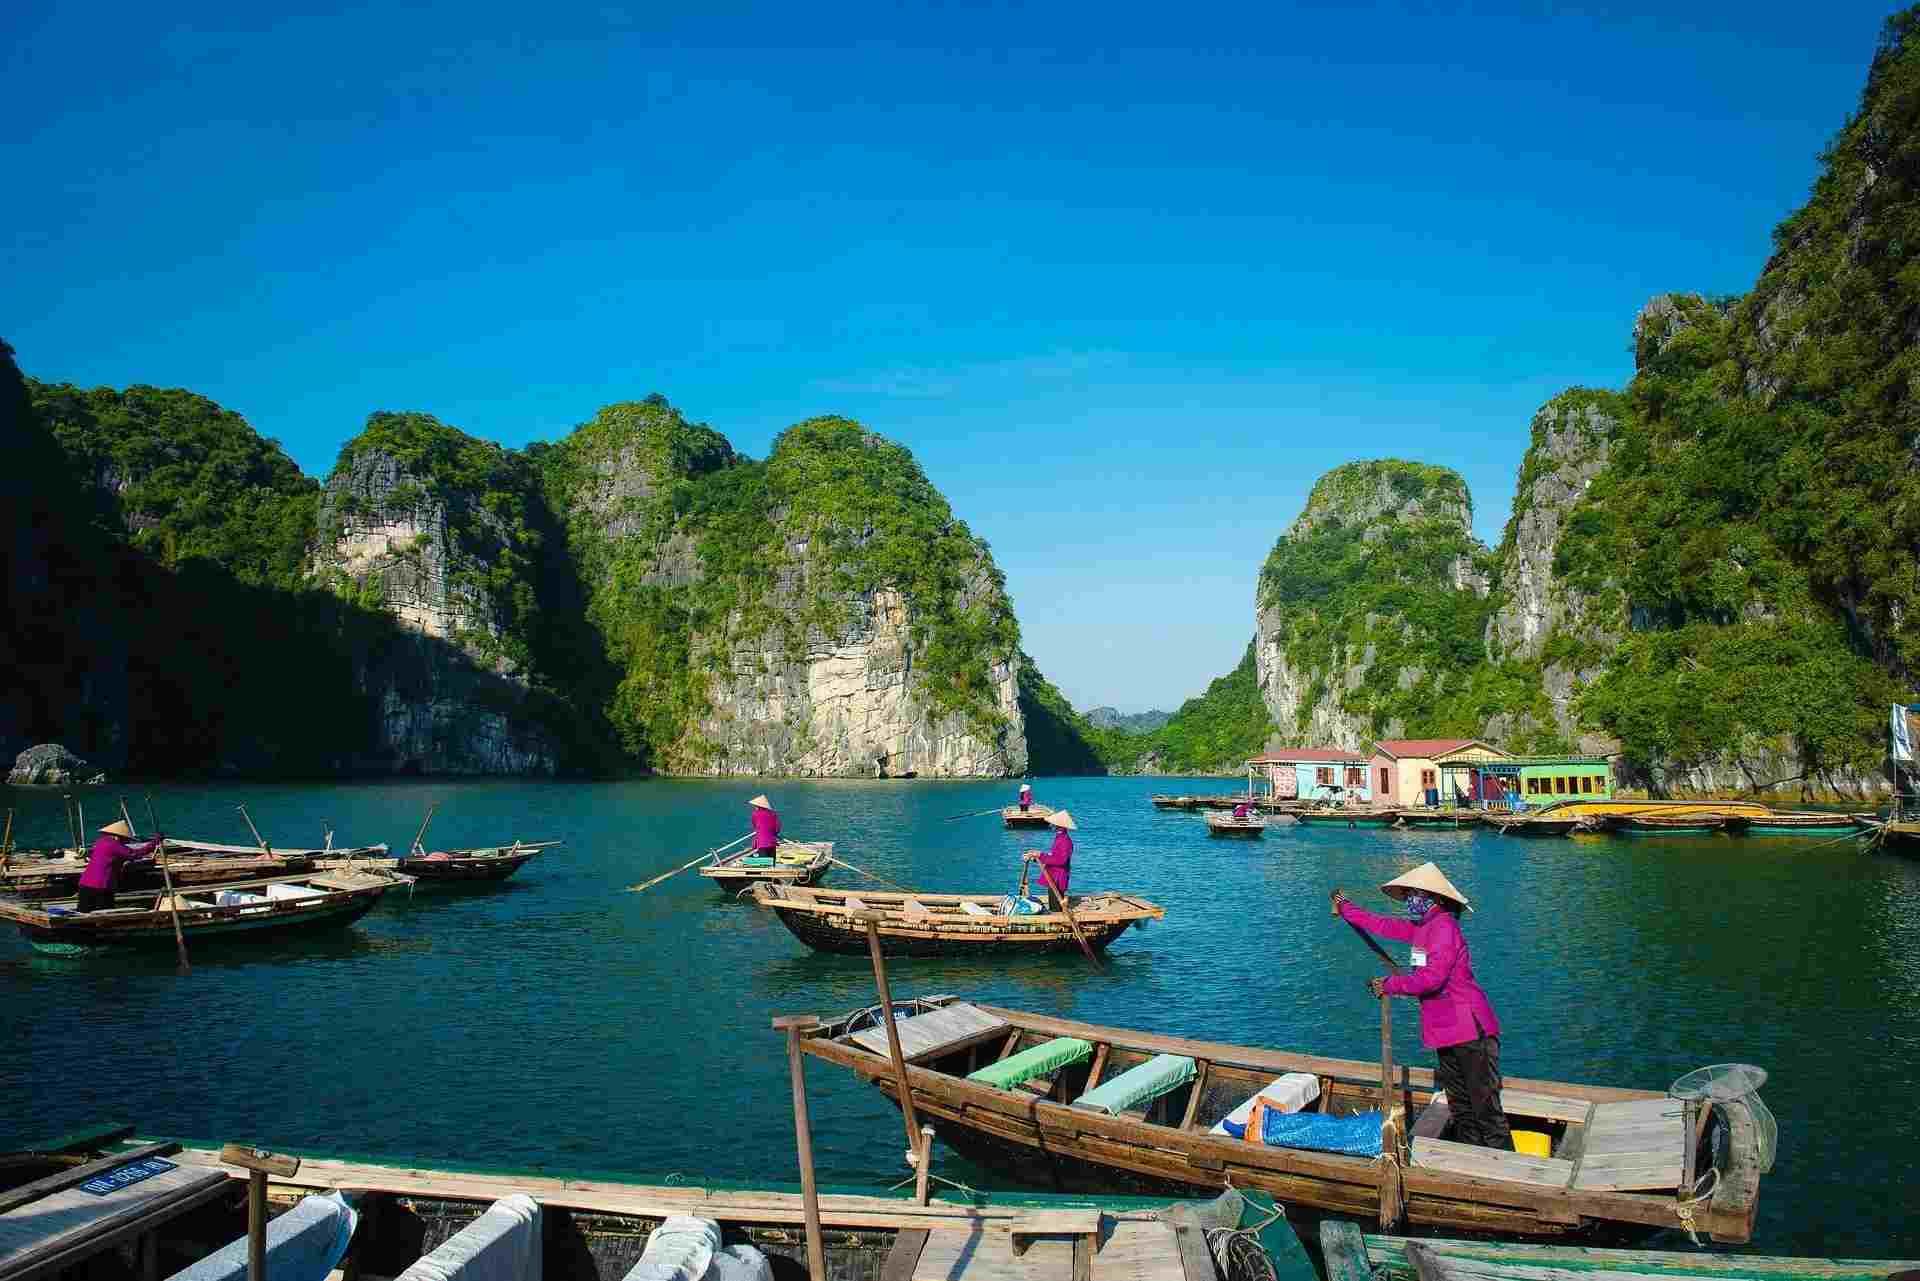 Halong Bay is reeling under pollution woes